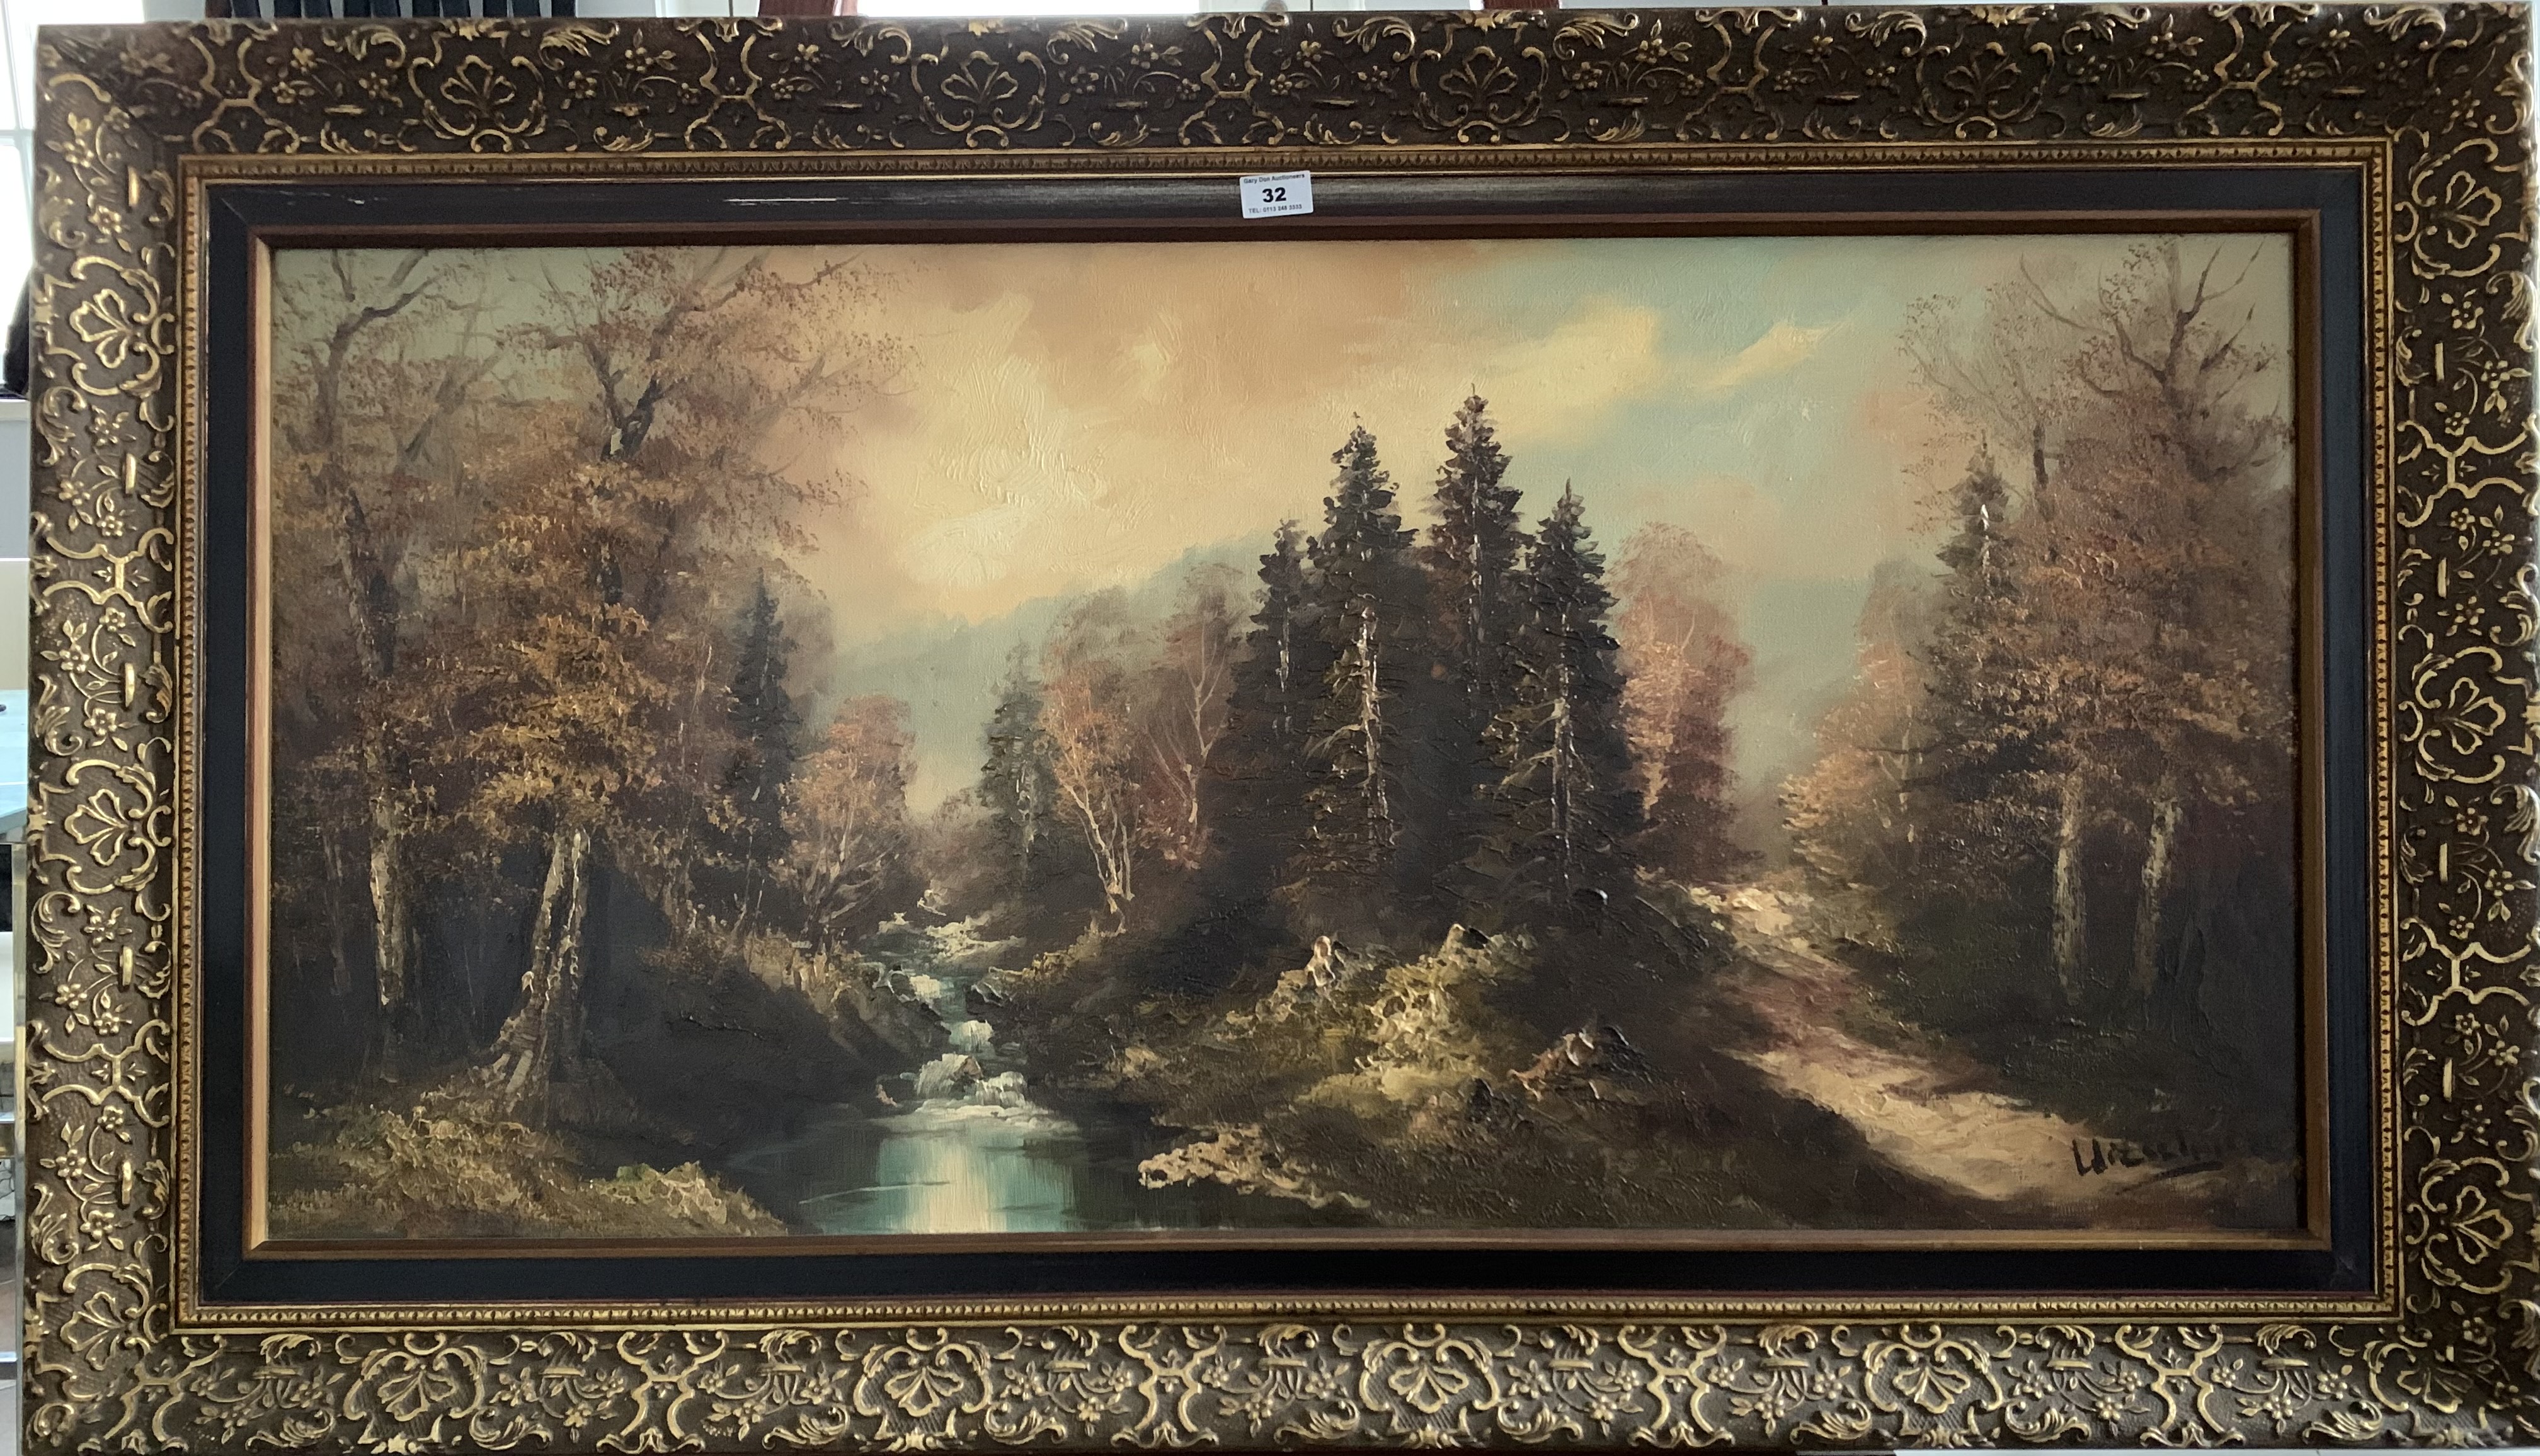 Oil painting on canvas of forest scene, signature indecipherable. 39” x 19”, frame 46” x 27”. Good